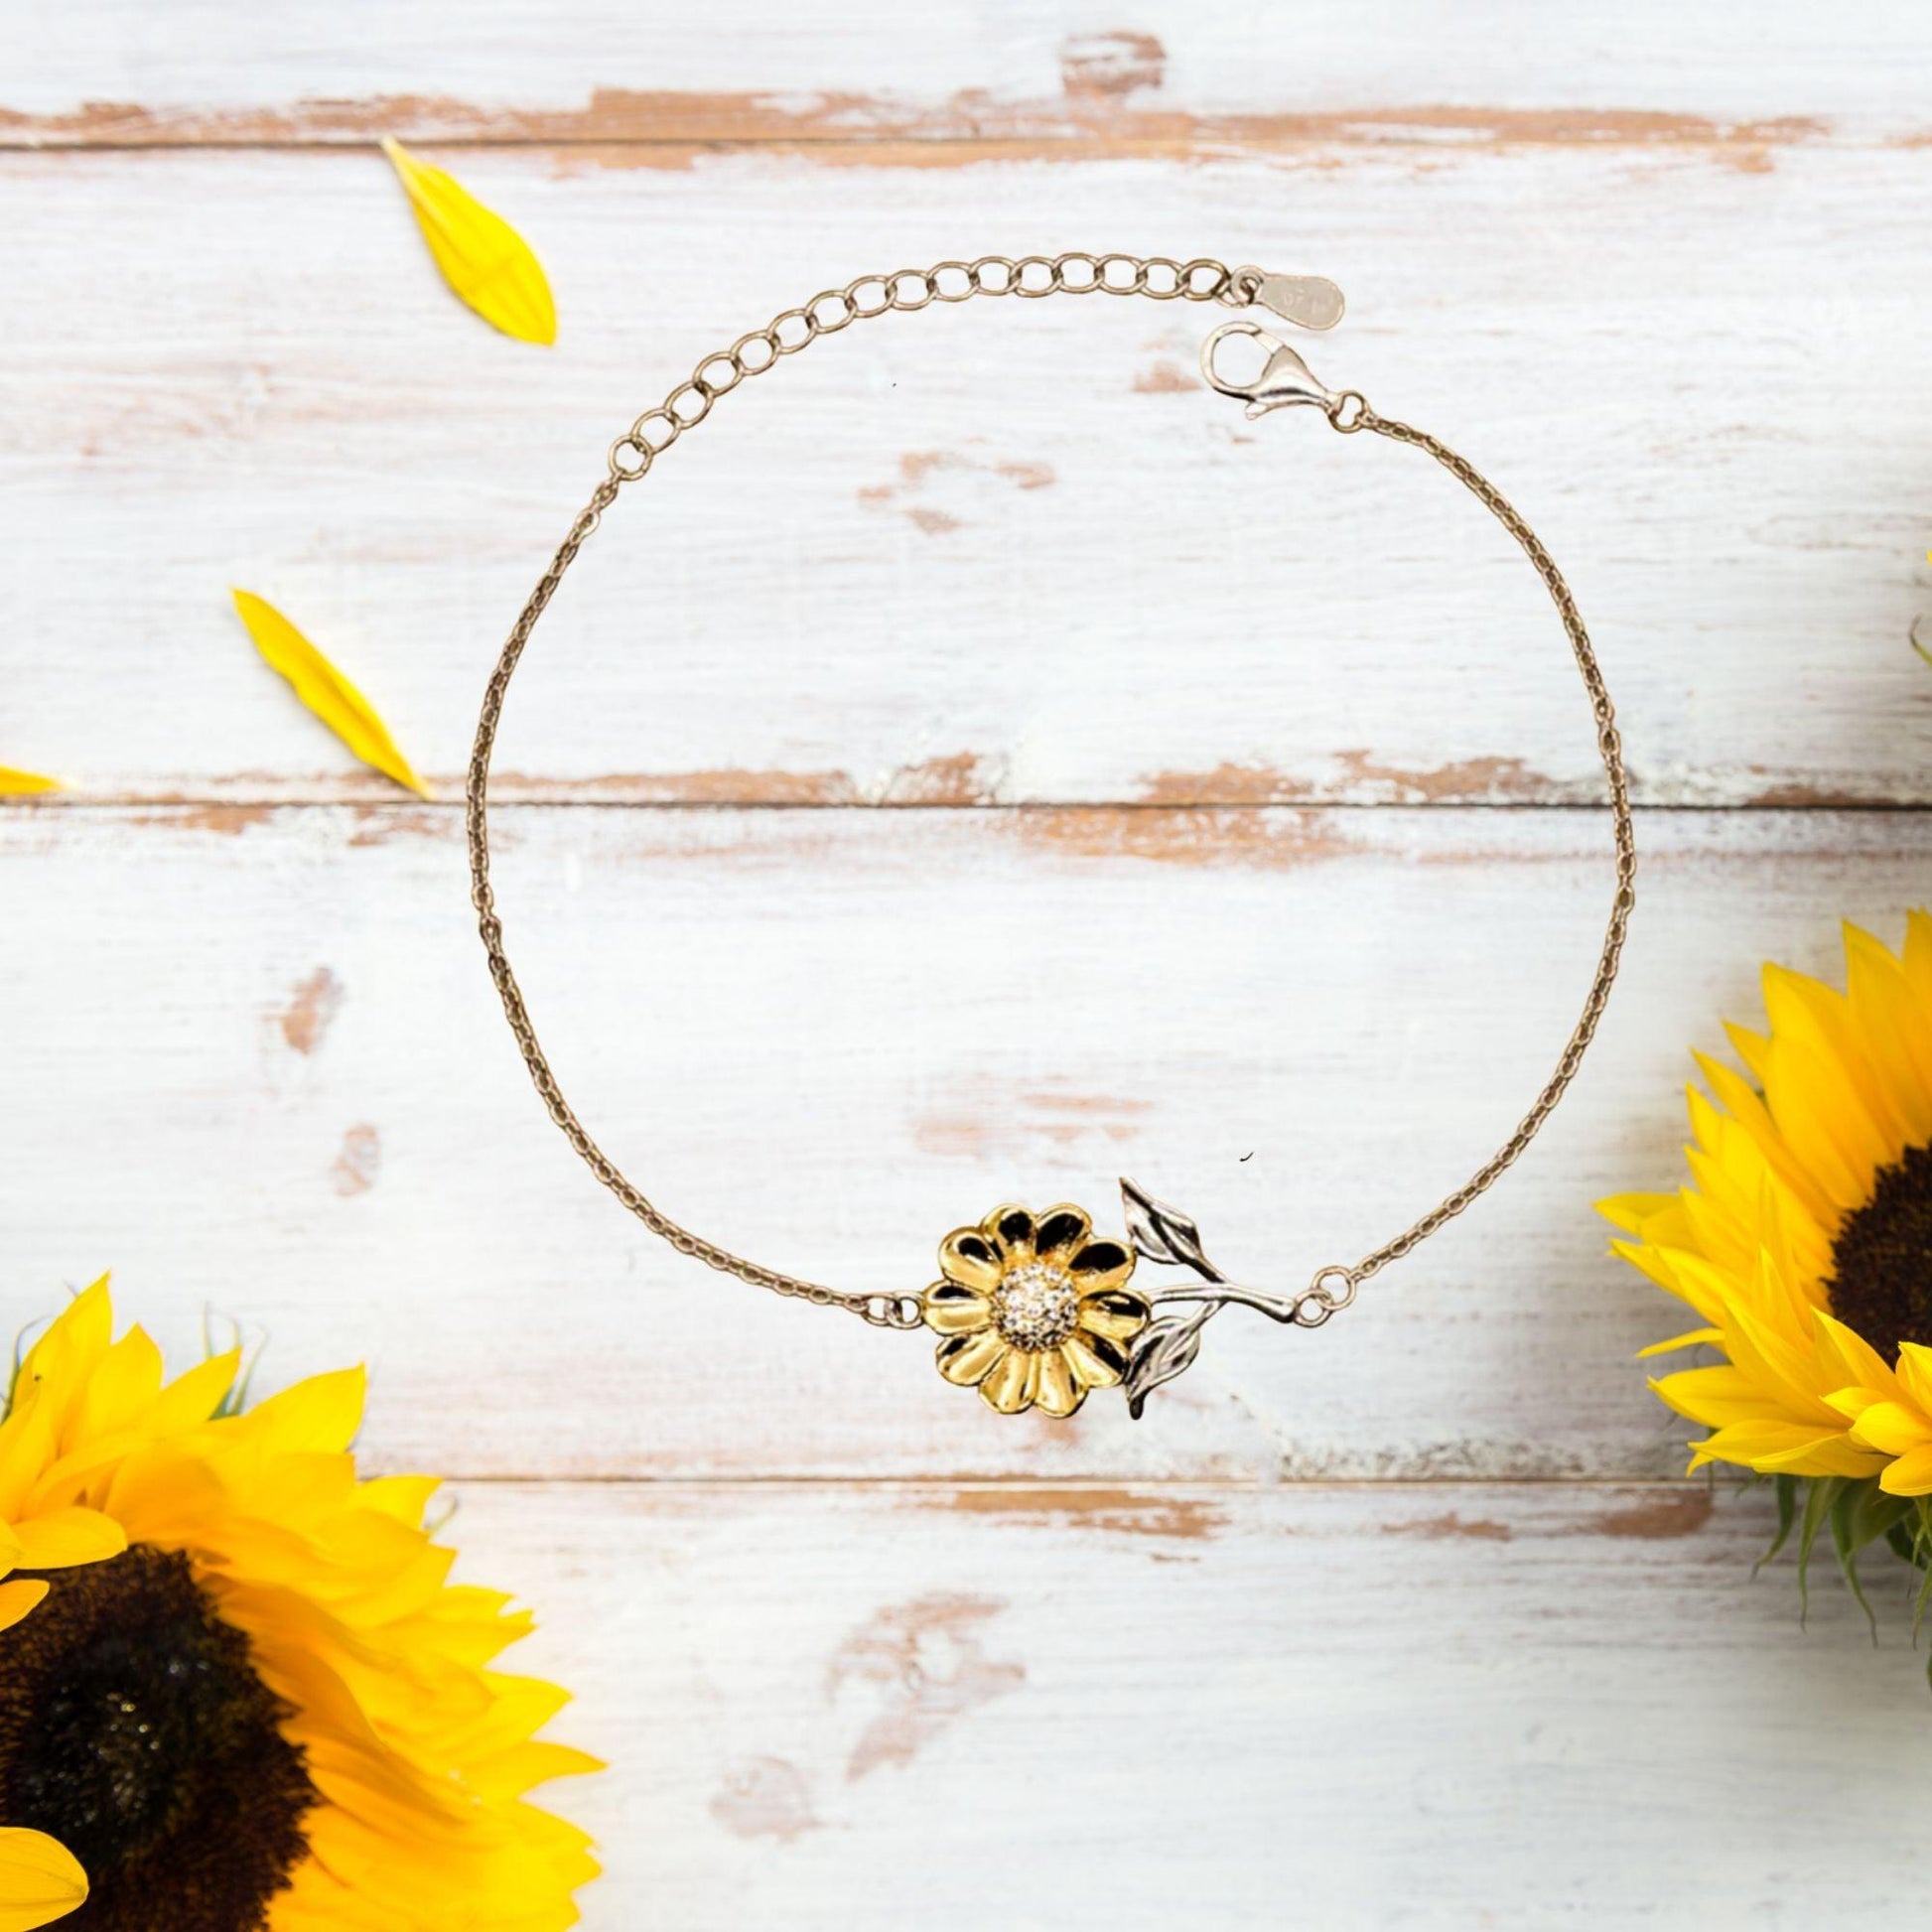 Remarkable Missionary Gifts, Your dedication and hard work, Inspirational Birthday Christmas Unique Sunflower Bracelet For Missionary, Coworkers, Men, Women, Friends - Mallard Moon Gift Shop